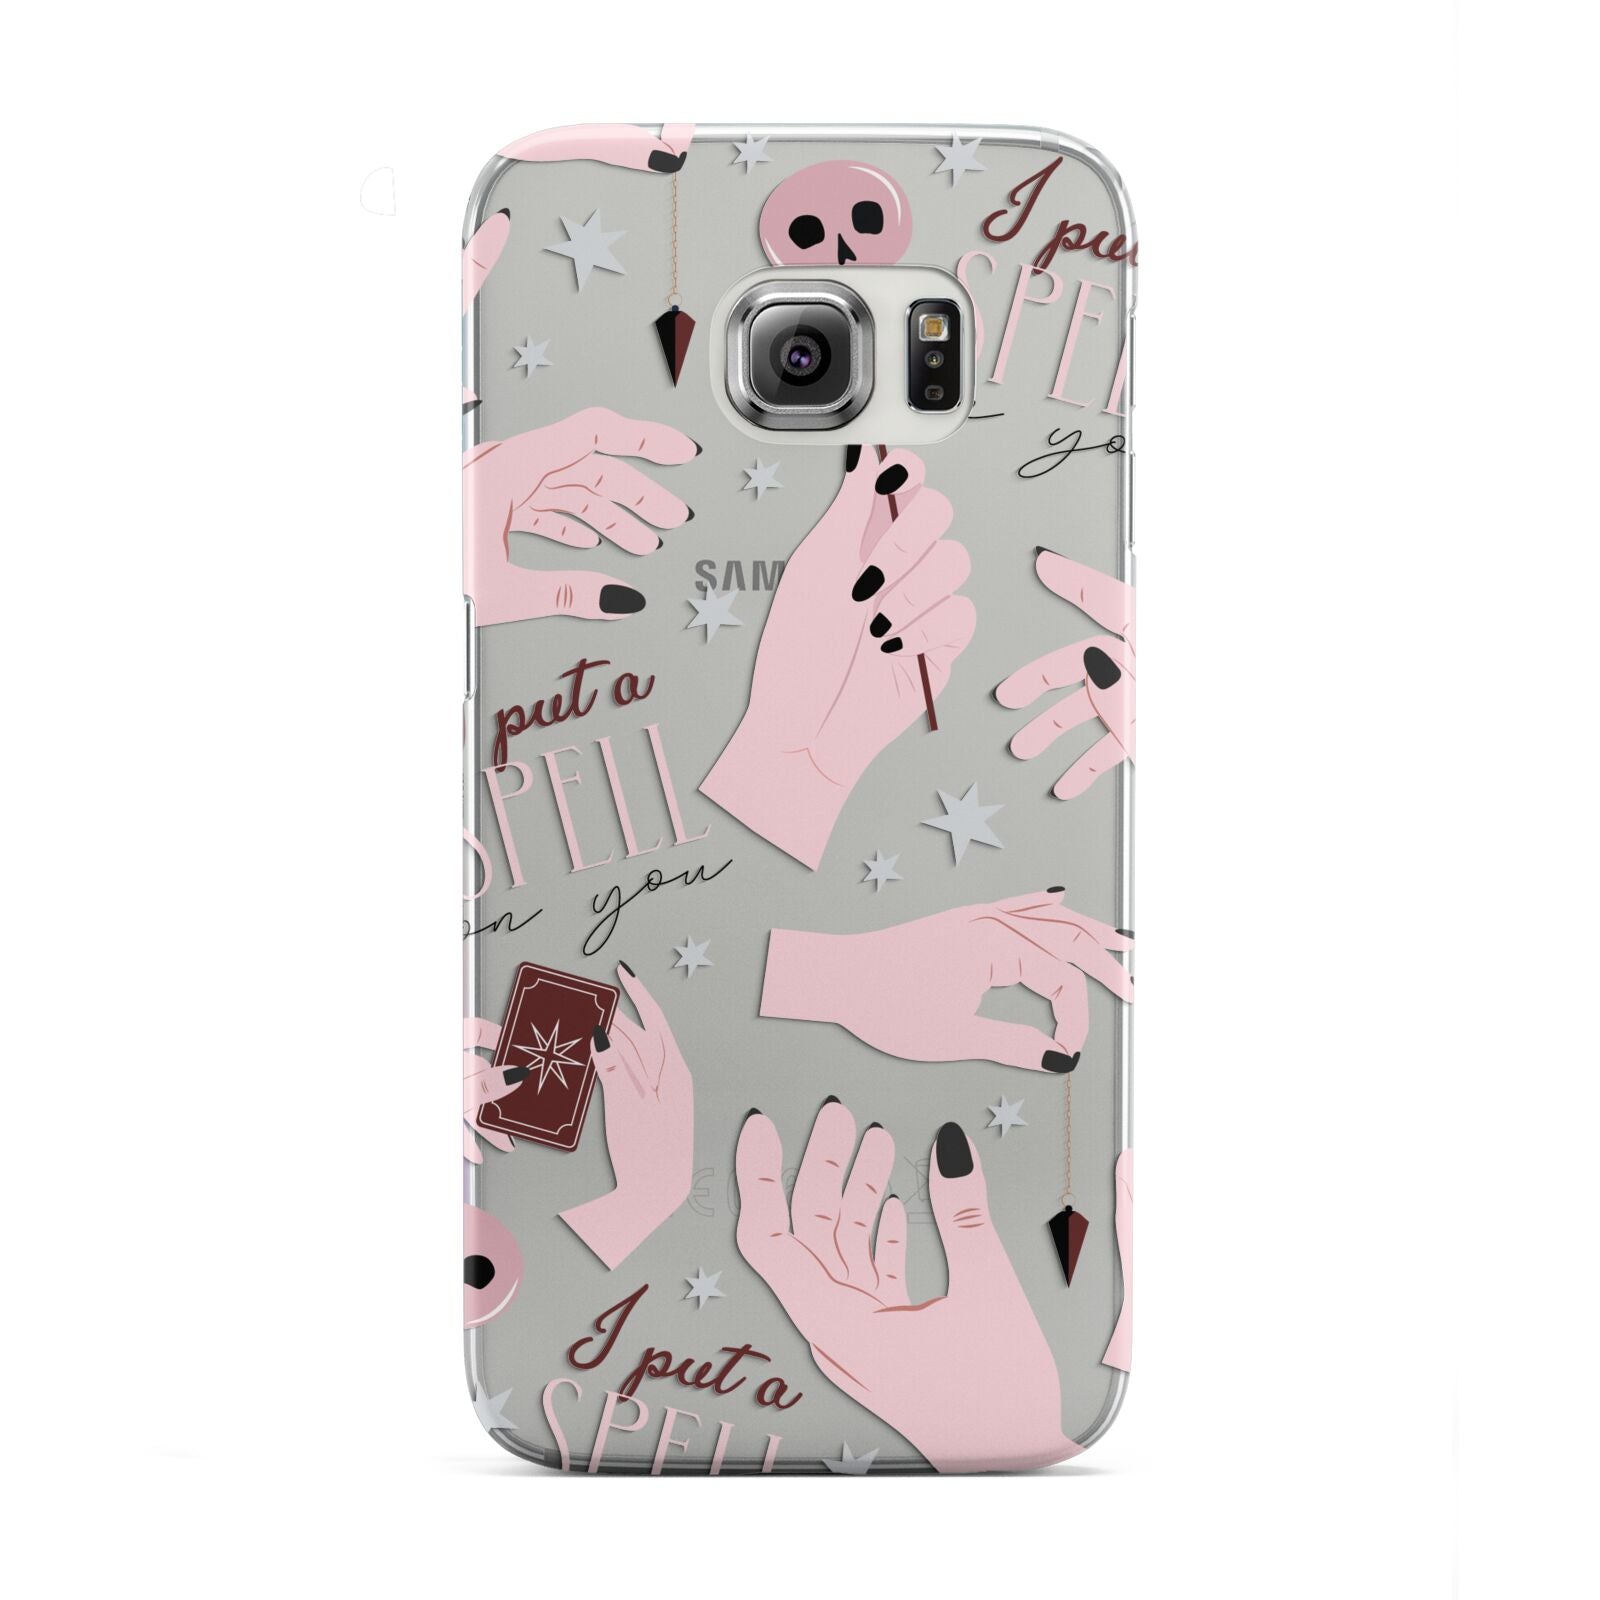 Witches Hands and Tarot Cards Samsung Galaxy S6 Edge Case